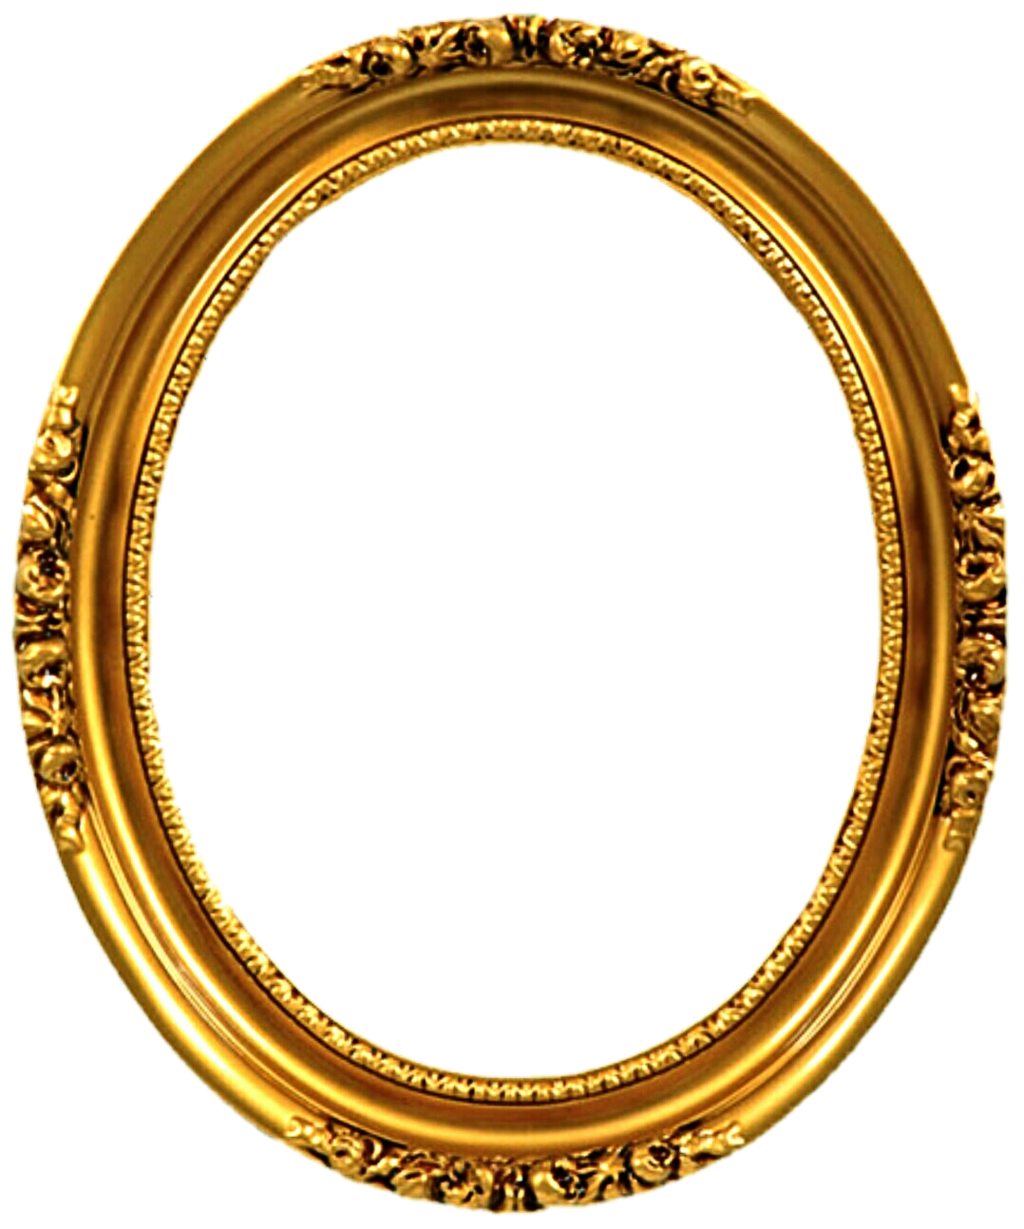 Gold PNG Images, Gold Frame, Gold Border, Chain, Glitter, Coins Clipart